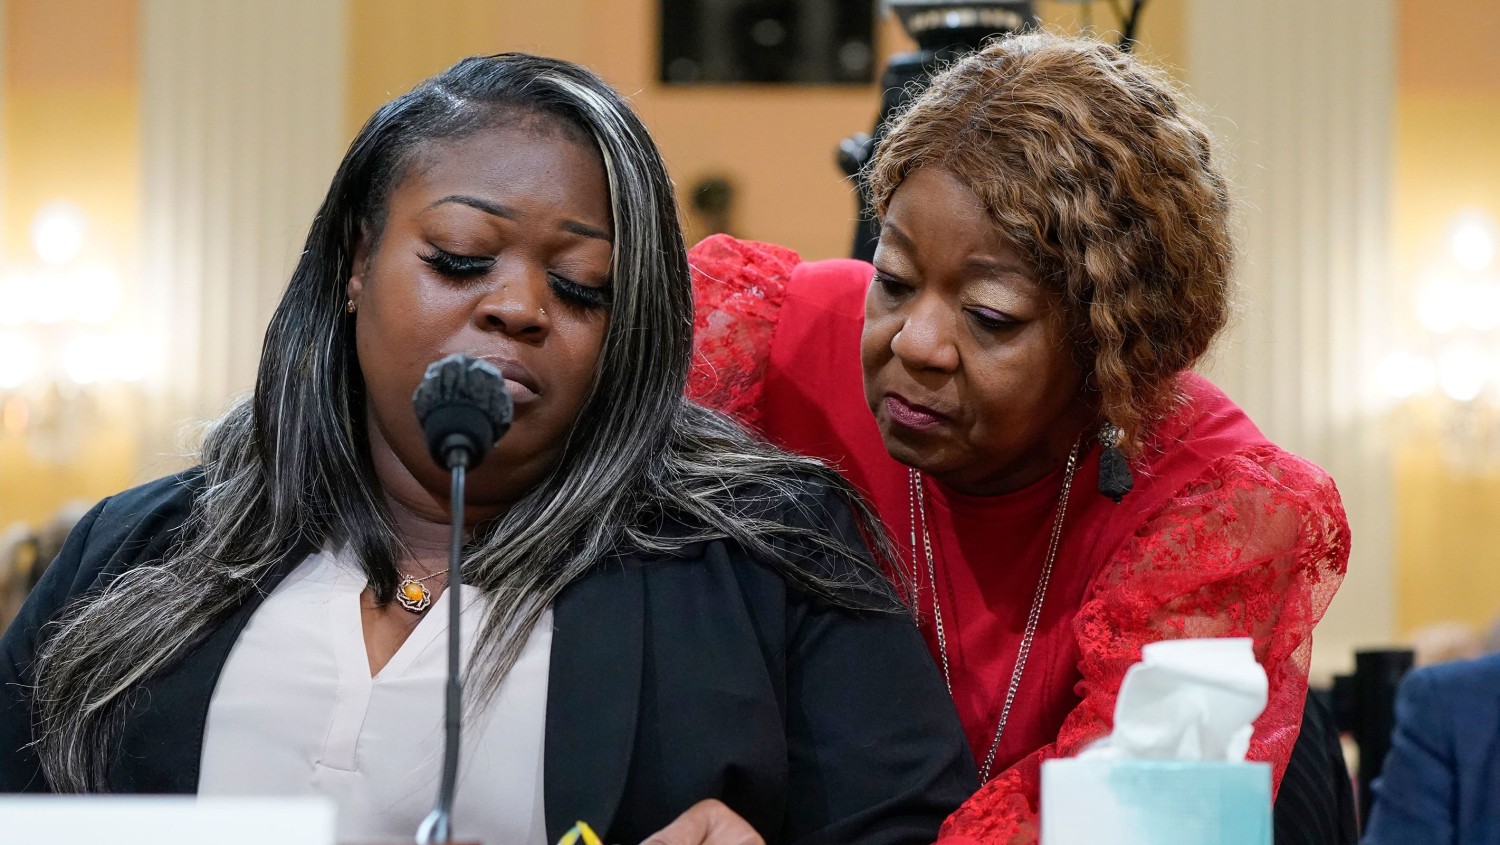 Wandrea Shaye Moss, a former Georgia election worker, is comforted by her mother, Ruby Freeman, right, as the House select committee investigating the January 6 attack on the US Capitol holds a hearing at the Capitol in Washington in June 2022.